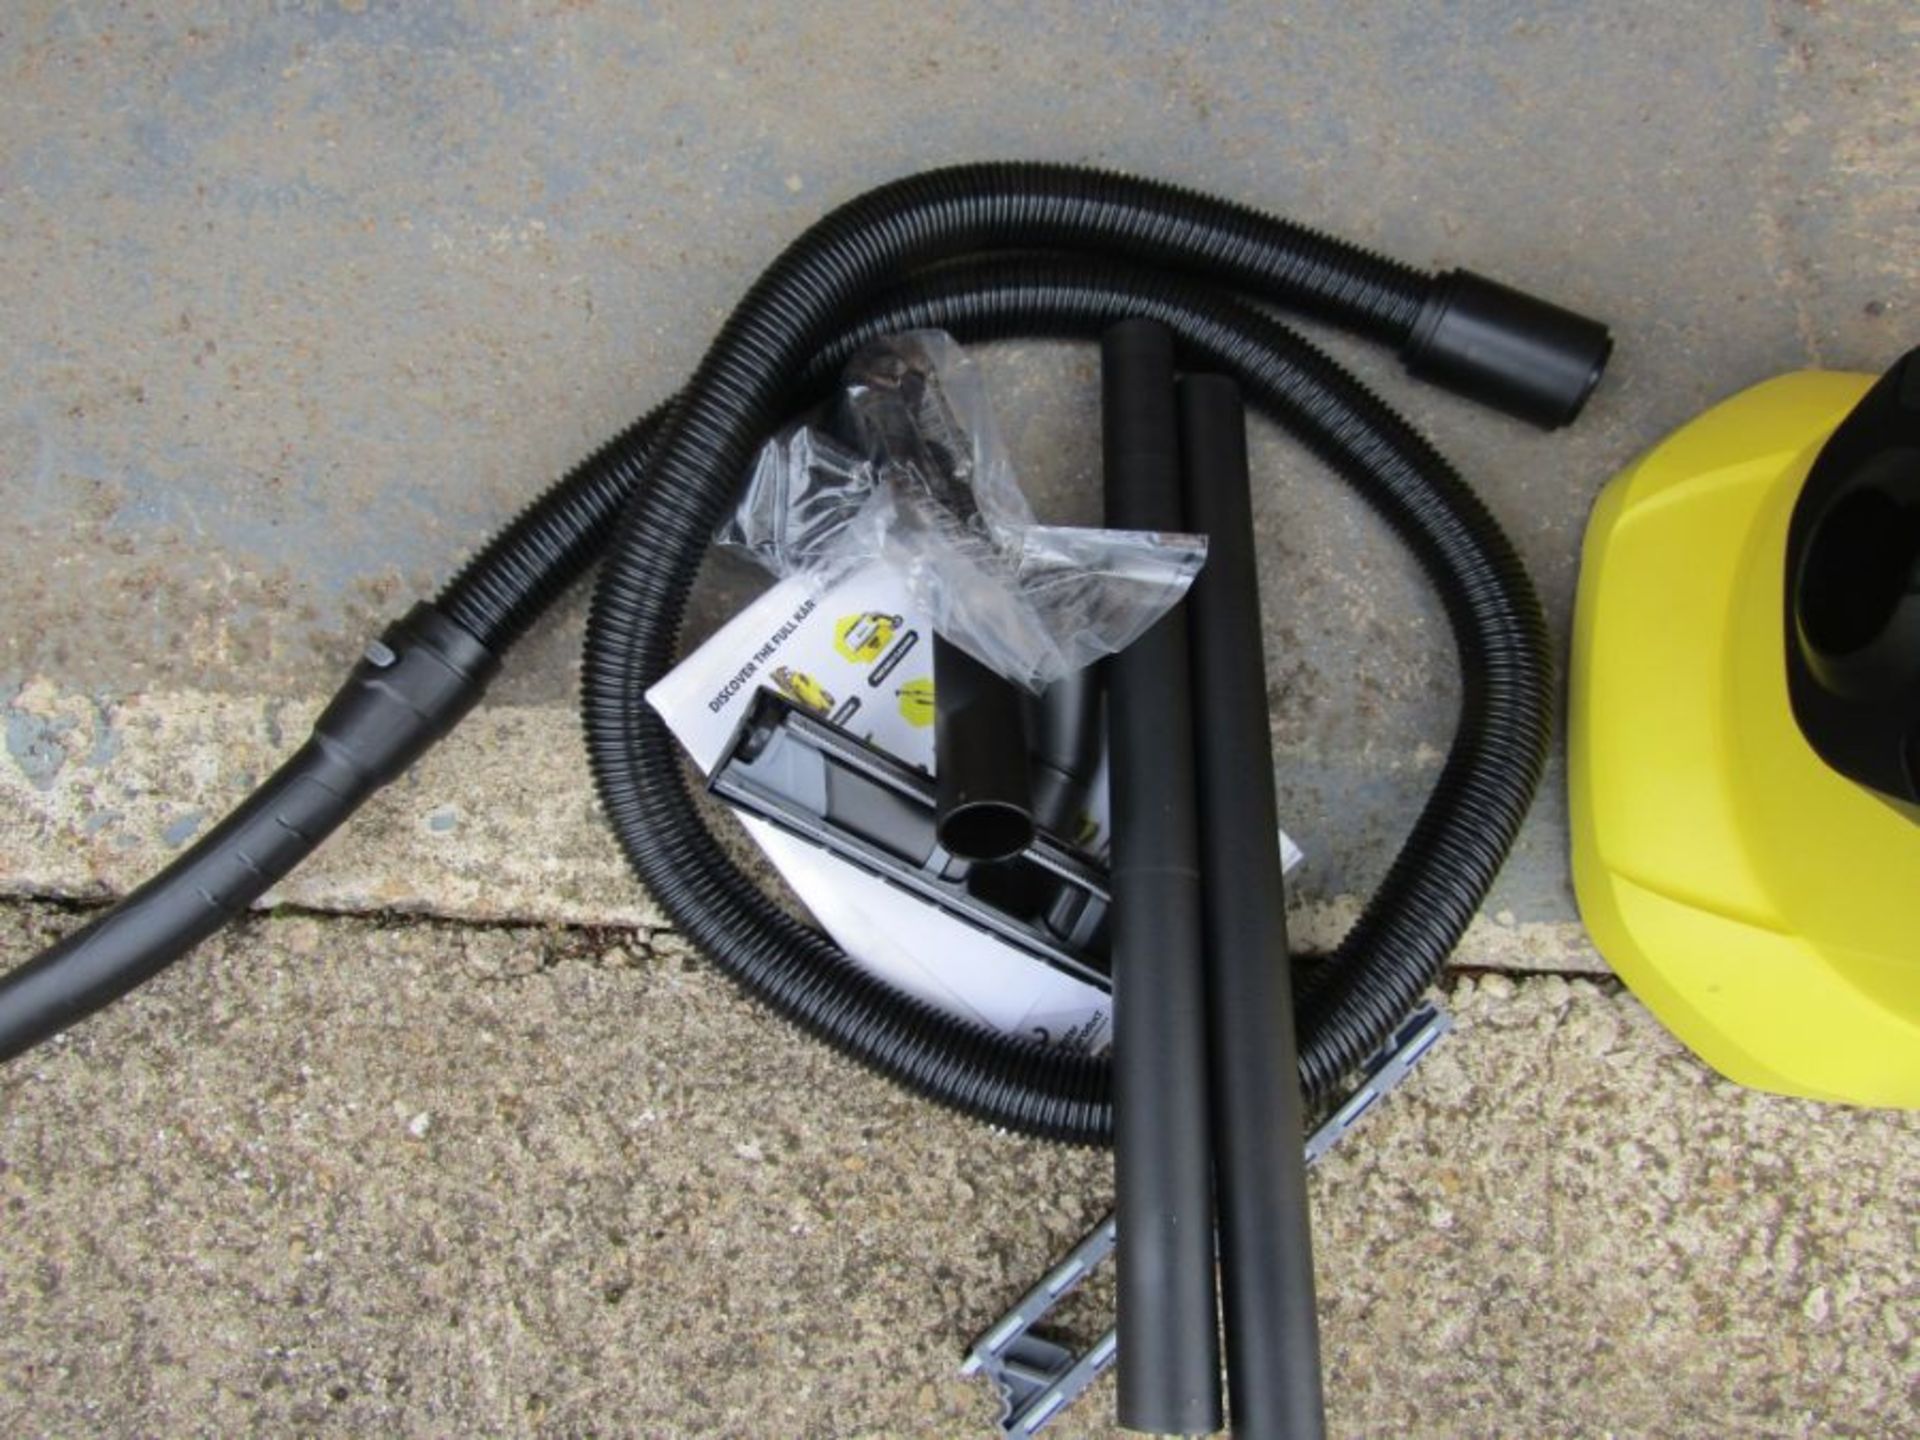 Karcher WD 4 Wet and Dry Vacuum Cleaner - Yellow - UK Plug Blk 1931654 - Image 3 of 6